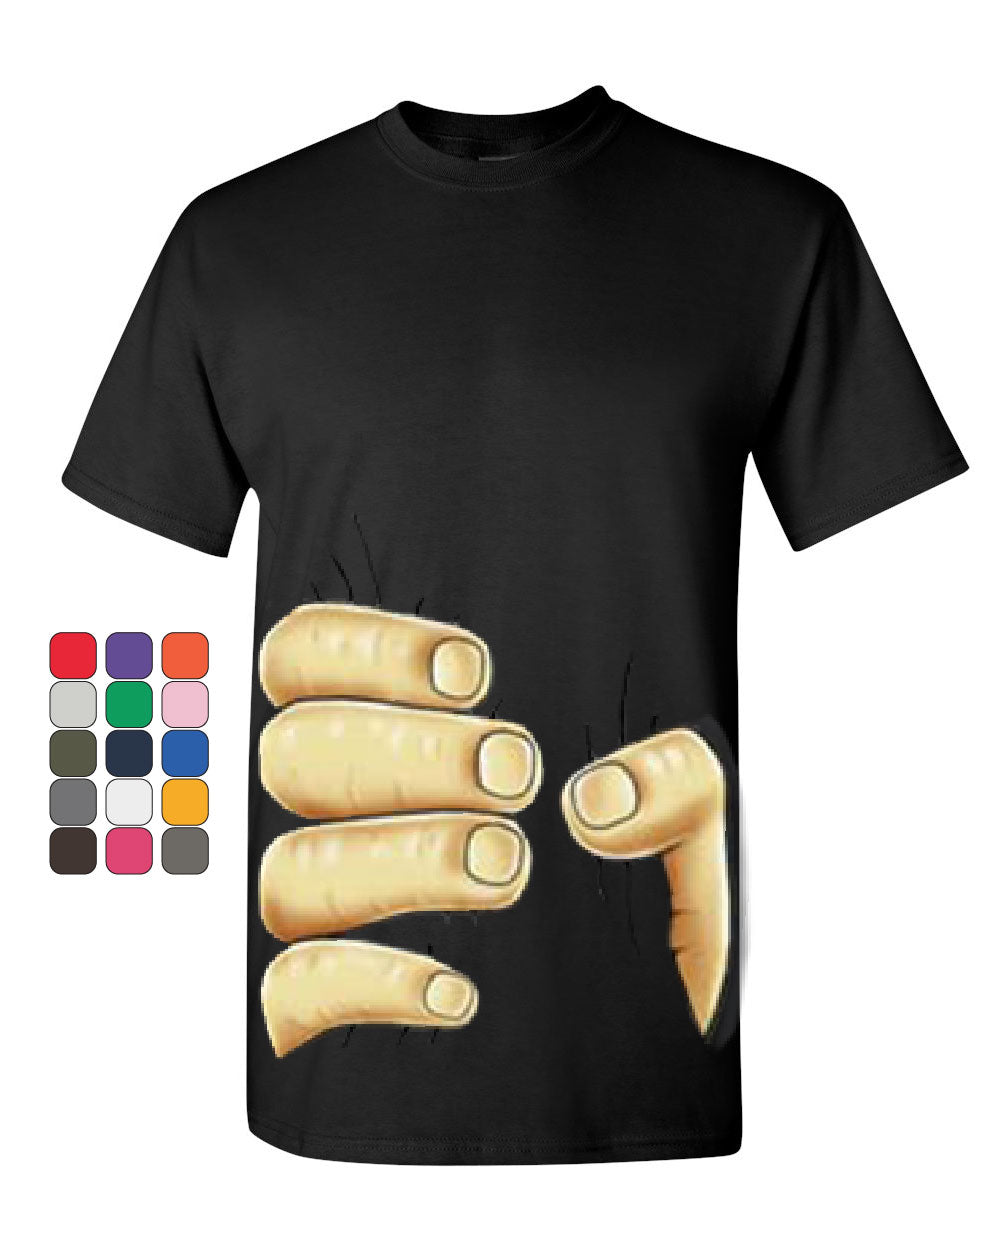 Giant Hand Squeezing T-Shirt Funny Male Hand Grabbing Tee Shirt